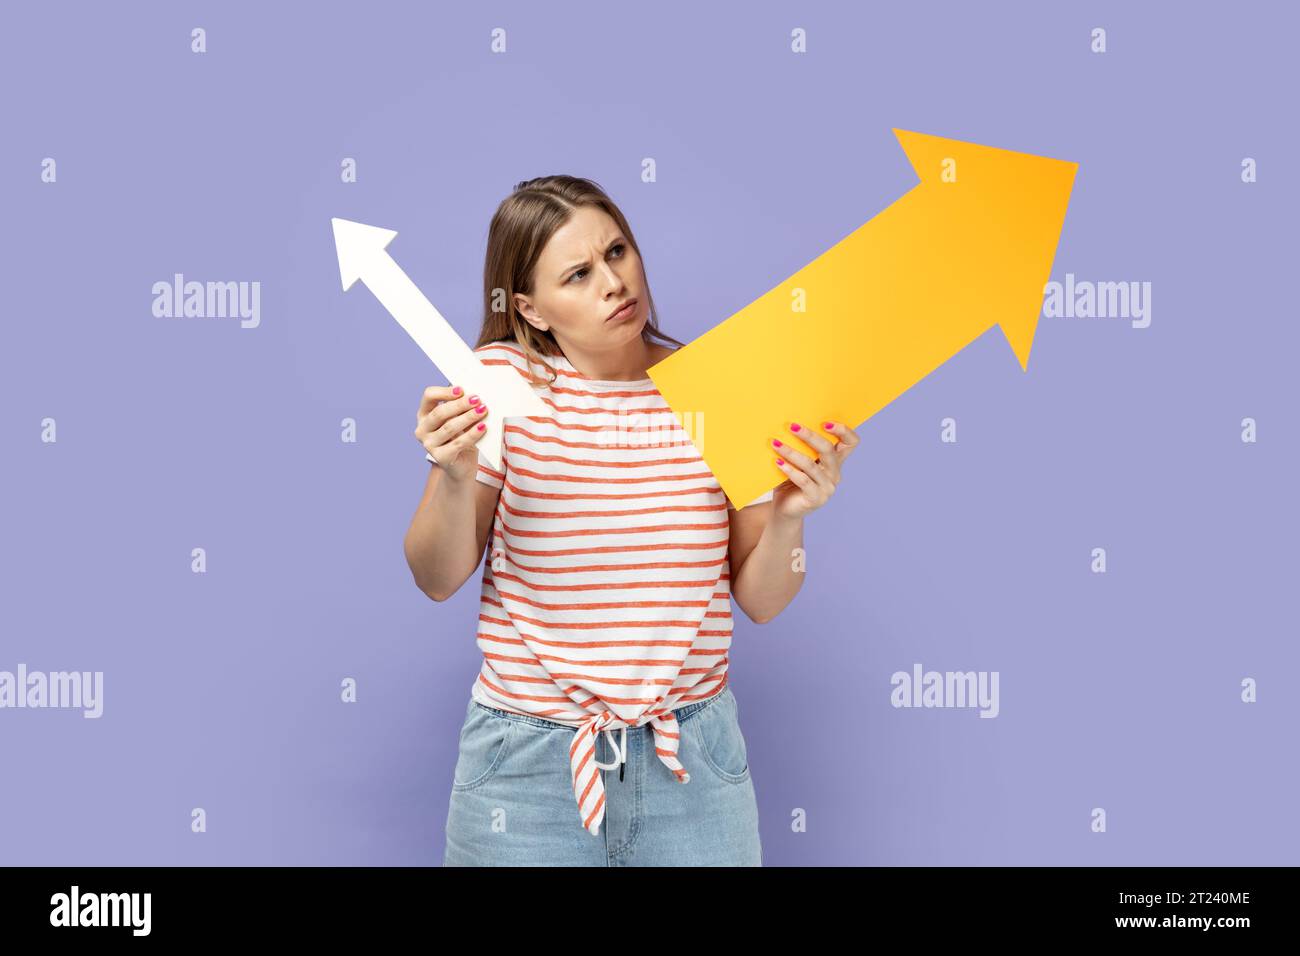 Portrait of confused pensive woman wearing striped T-shirt holding two arrows indicating to different sizes, looking at indicators with puzzlement. Indoor studio shot isolated on purple background. Stock Photo